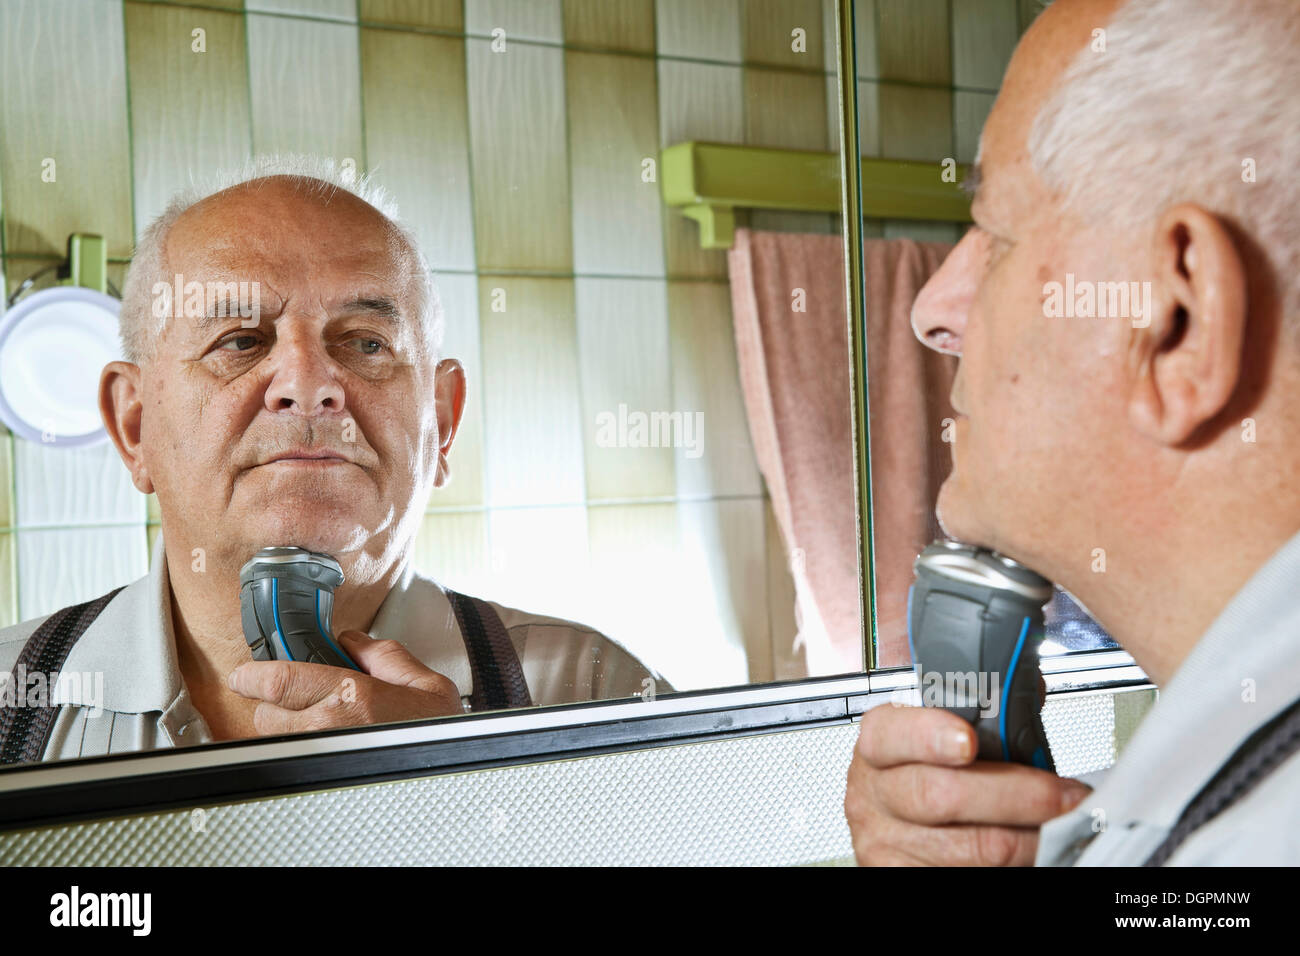 Elderly man using an electric shaver Stock Photo